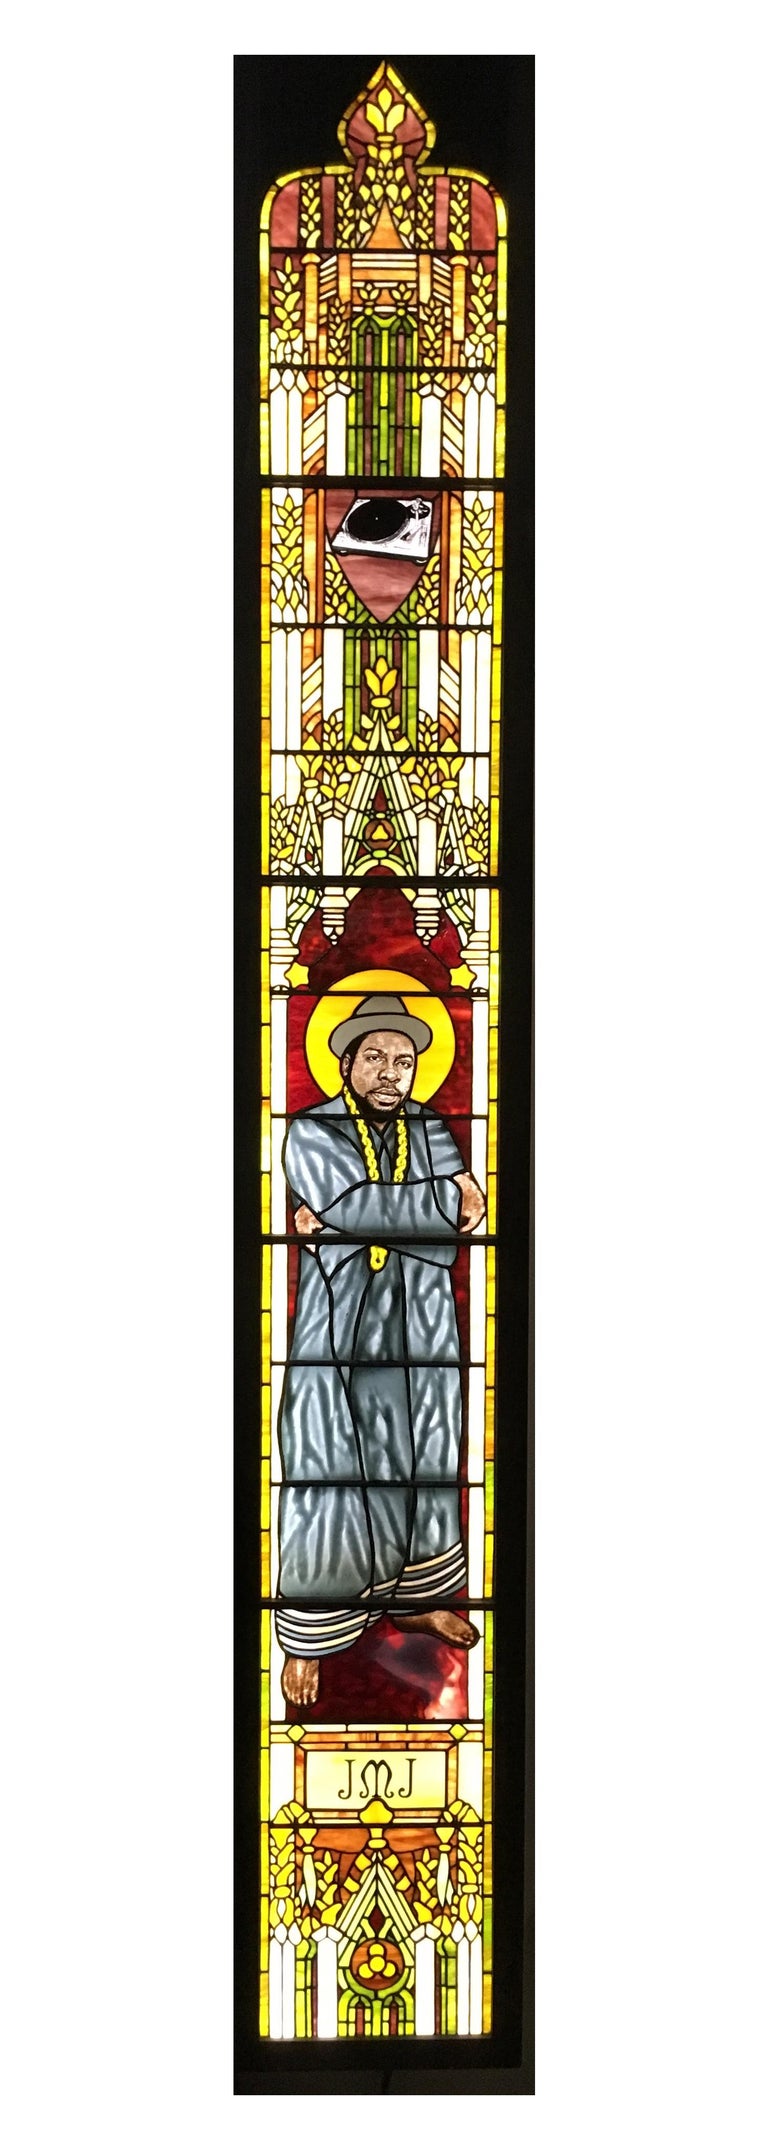 Tiffany style stained glass memorial work in honor of DJ Jam Master Jay

Handcrafted by TF Dutchman, 